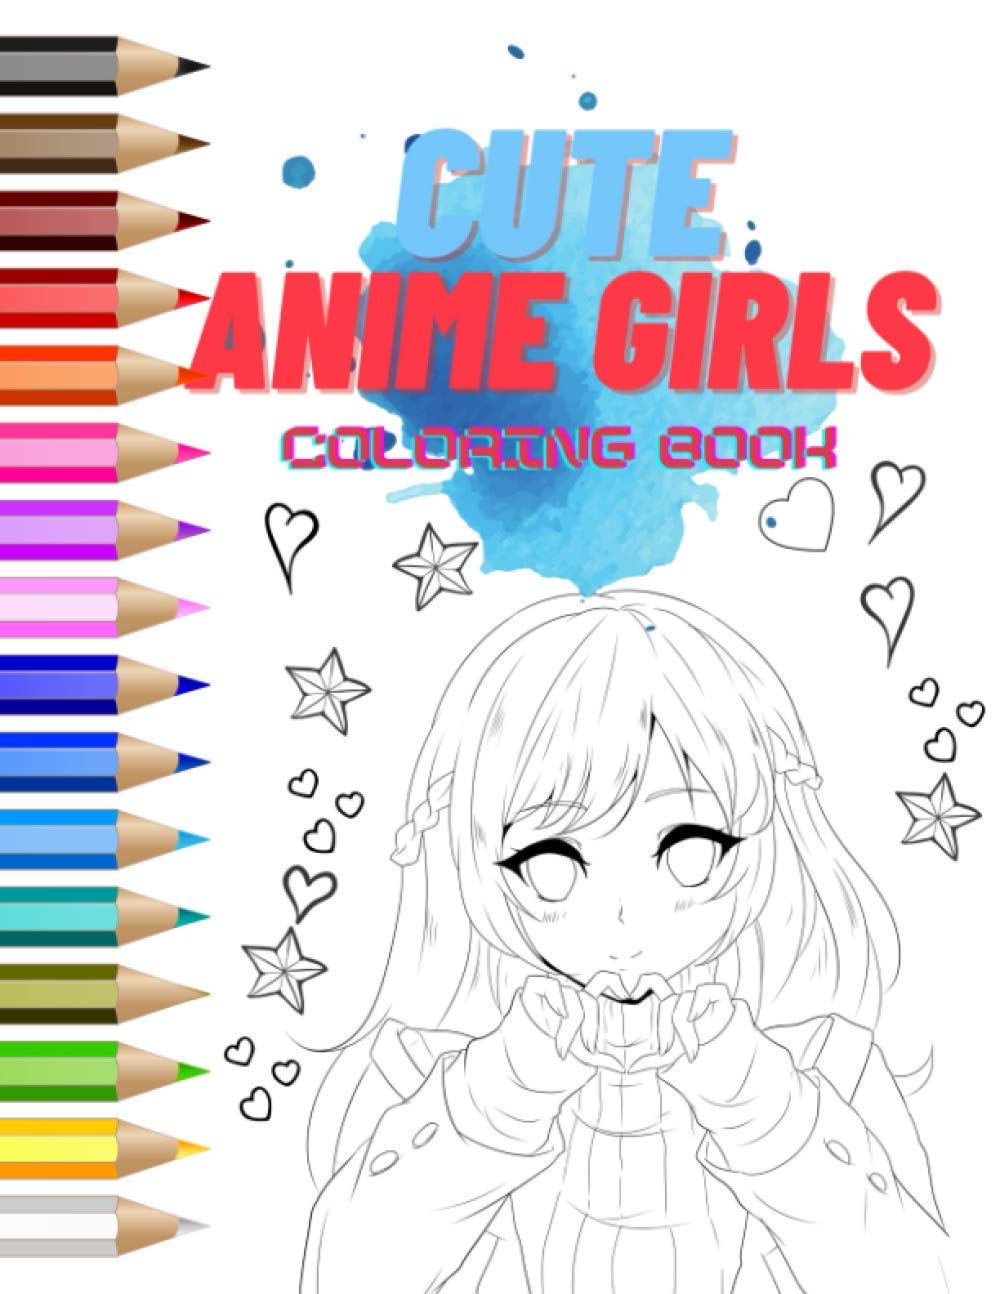 Mua Anime Girls Coloring Book: Coloring Pages for Teens and Adults  Featuring Kawaii Anime Girls (Anime Coloring) trên Amazon Anh chính hãng  2023 | Giaonhan247